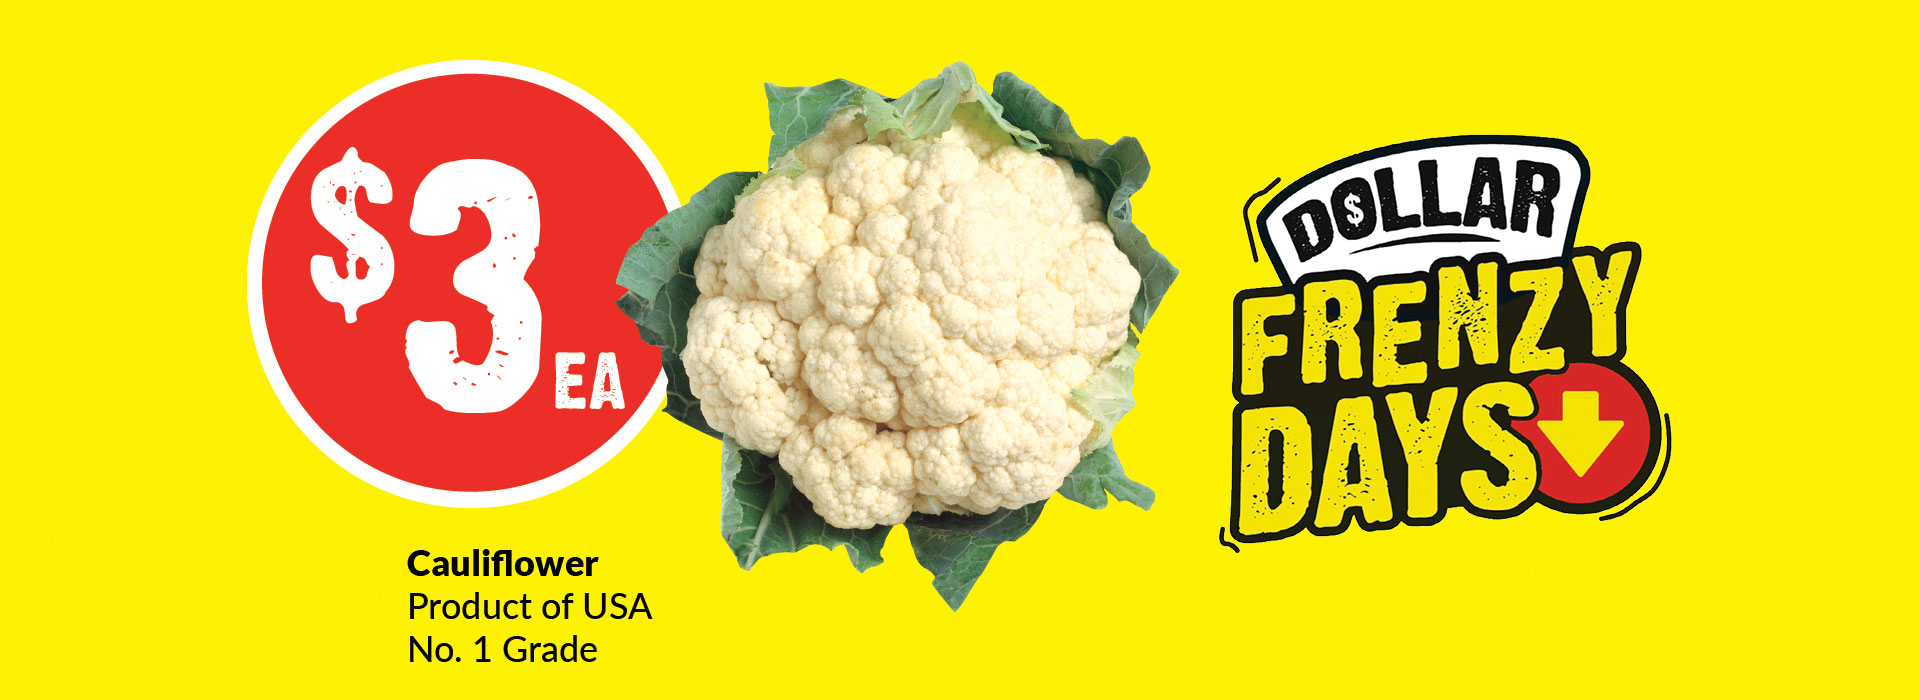 Text Reading 'Buy Cauliflower which is a number one product of USA only at $3 each.'